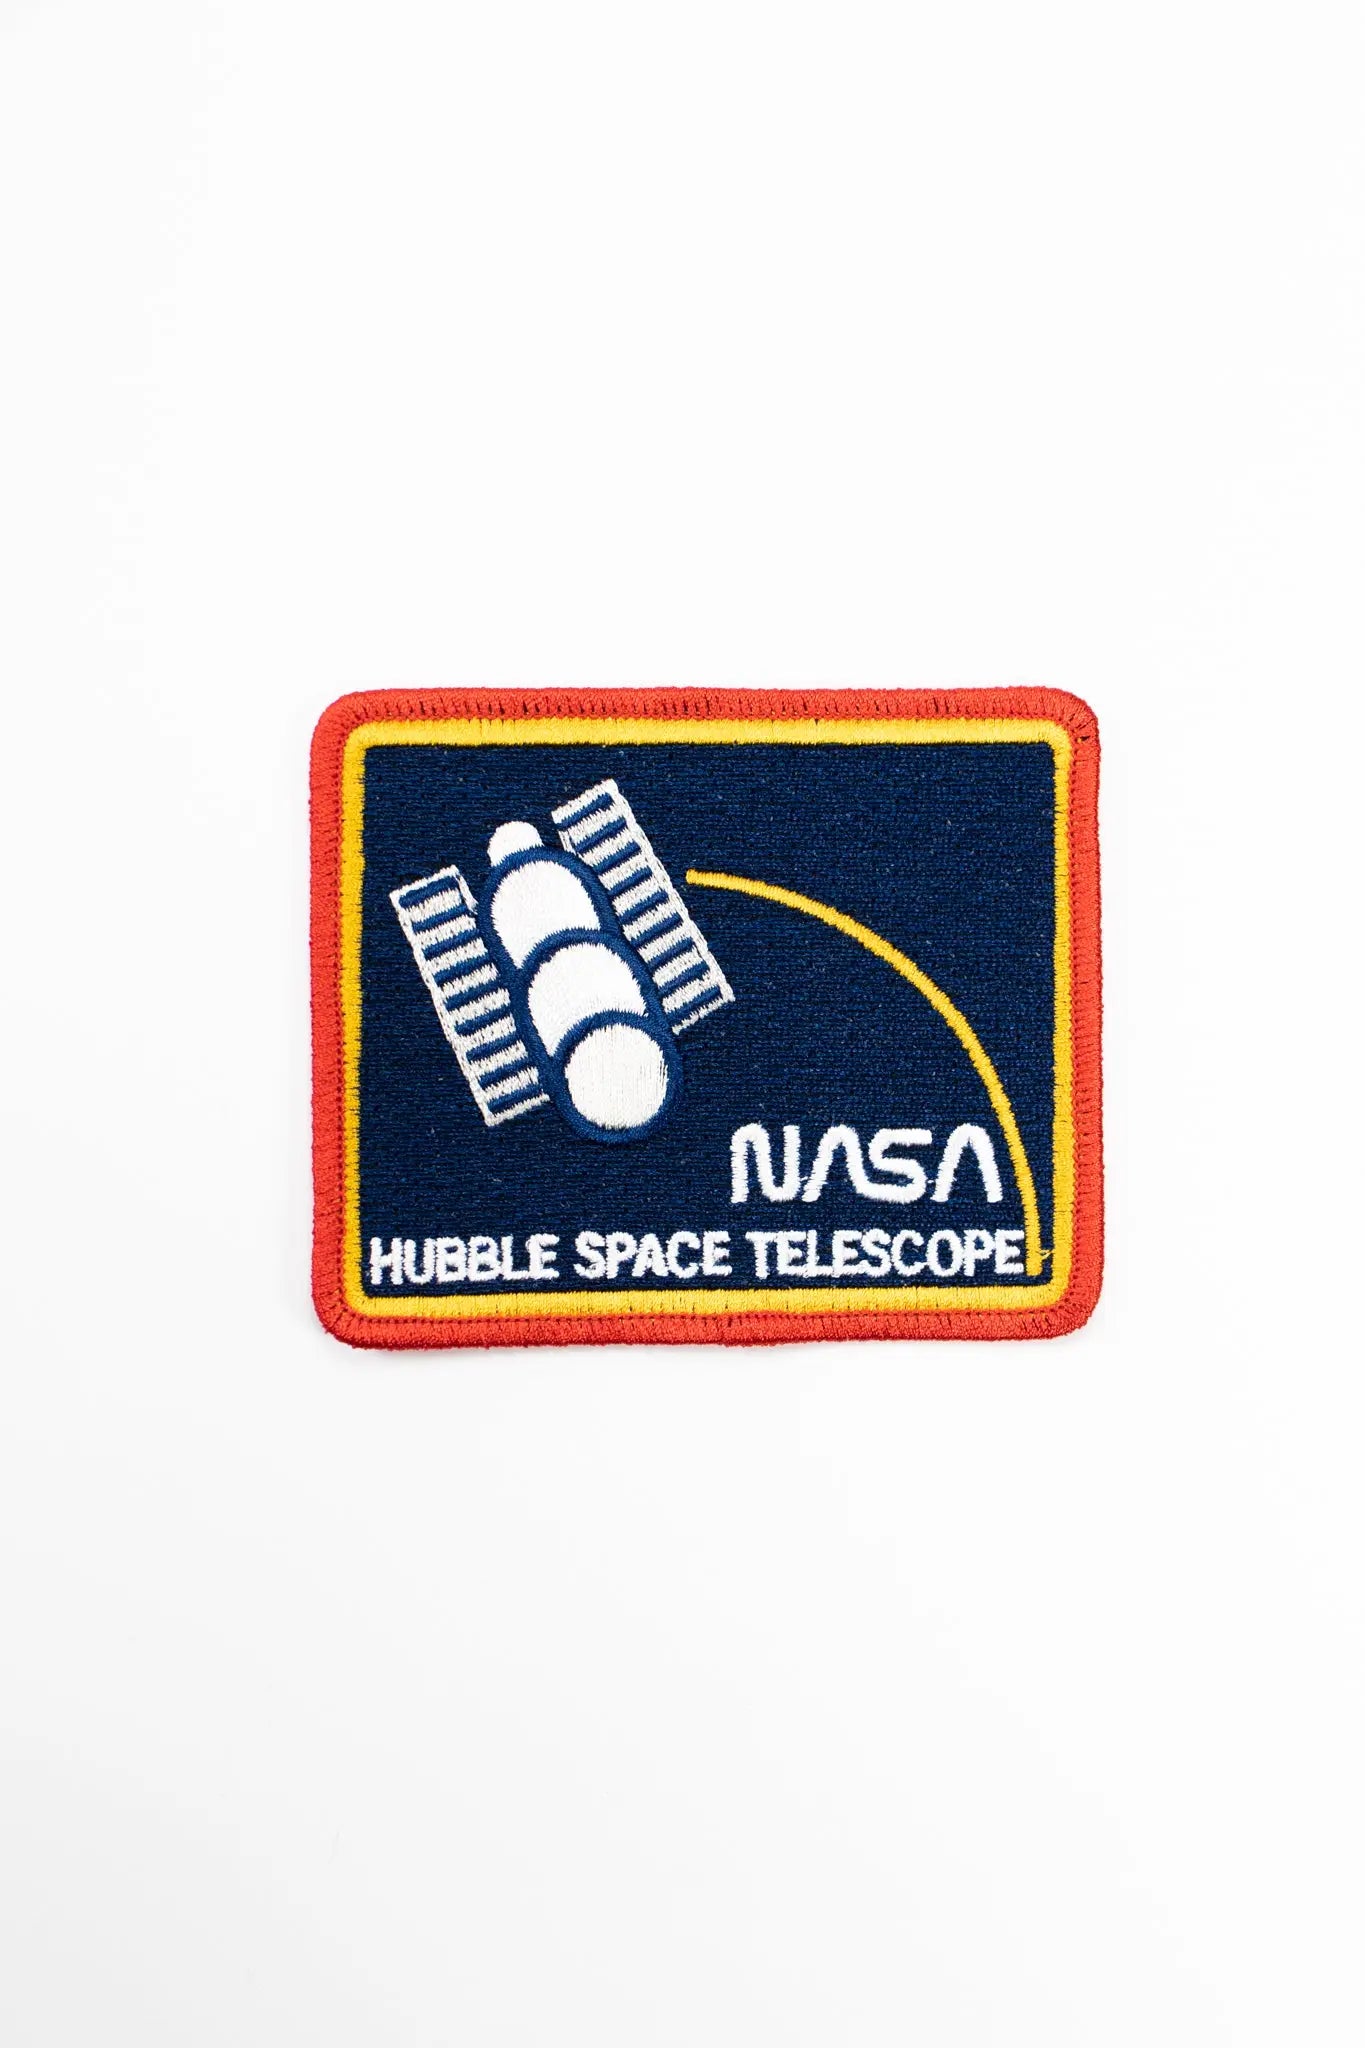 Hubble Space Telescope Patch - Stemcell Science Shop